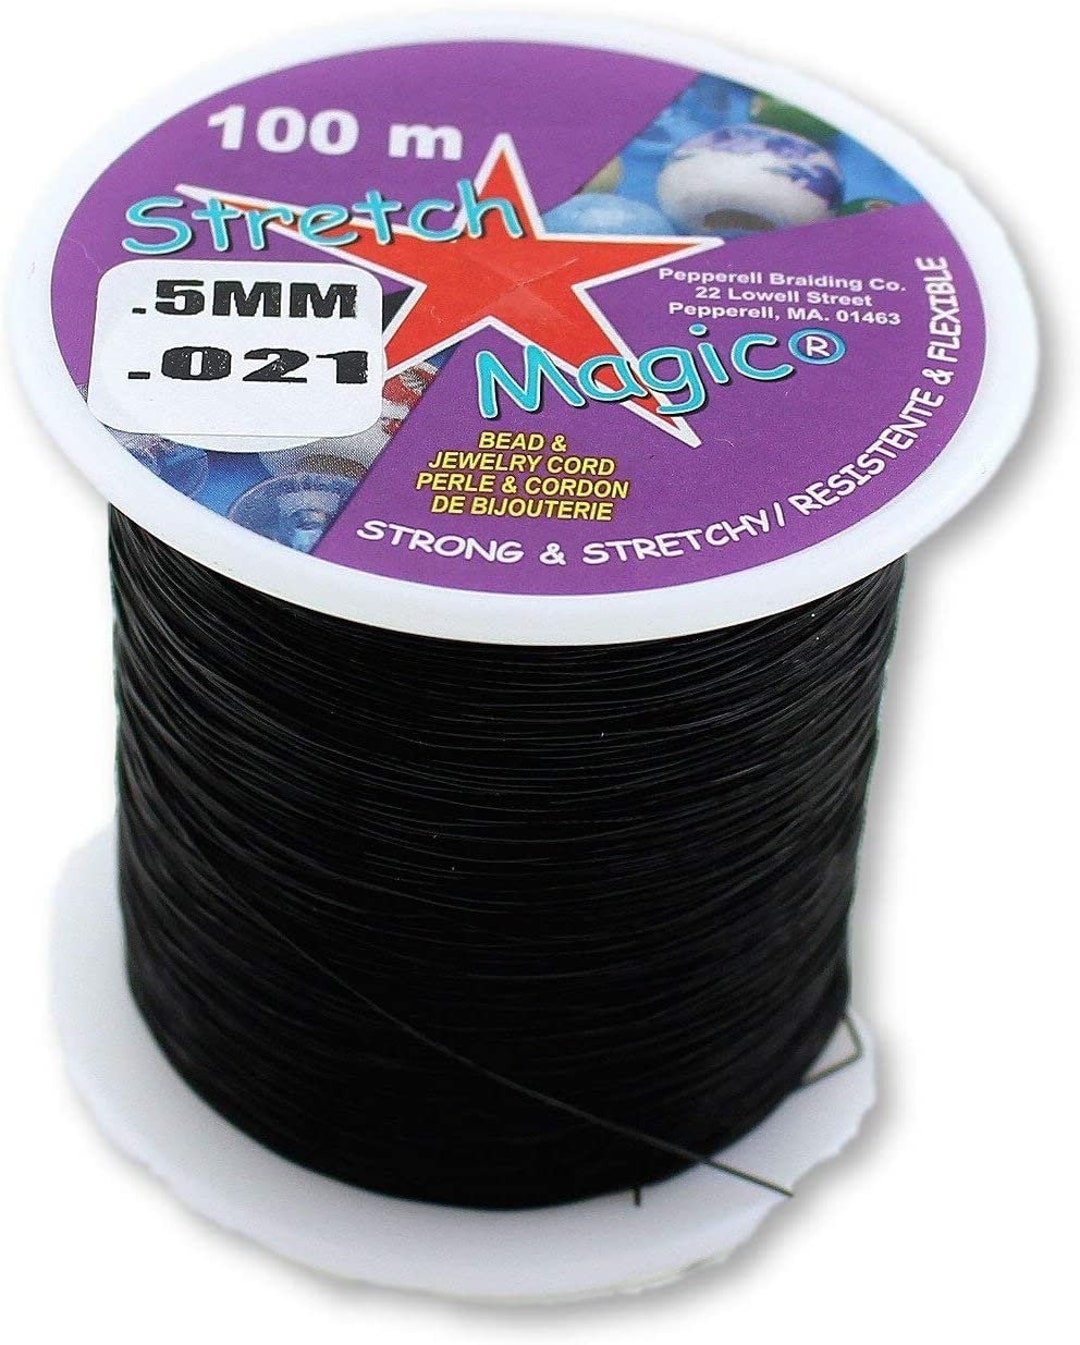 Clear Stretch Magic, .5mm diameter x 10 meters length - stretchy craft cord  string Free Shipping